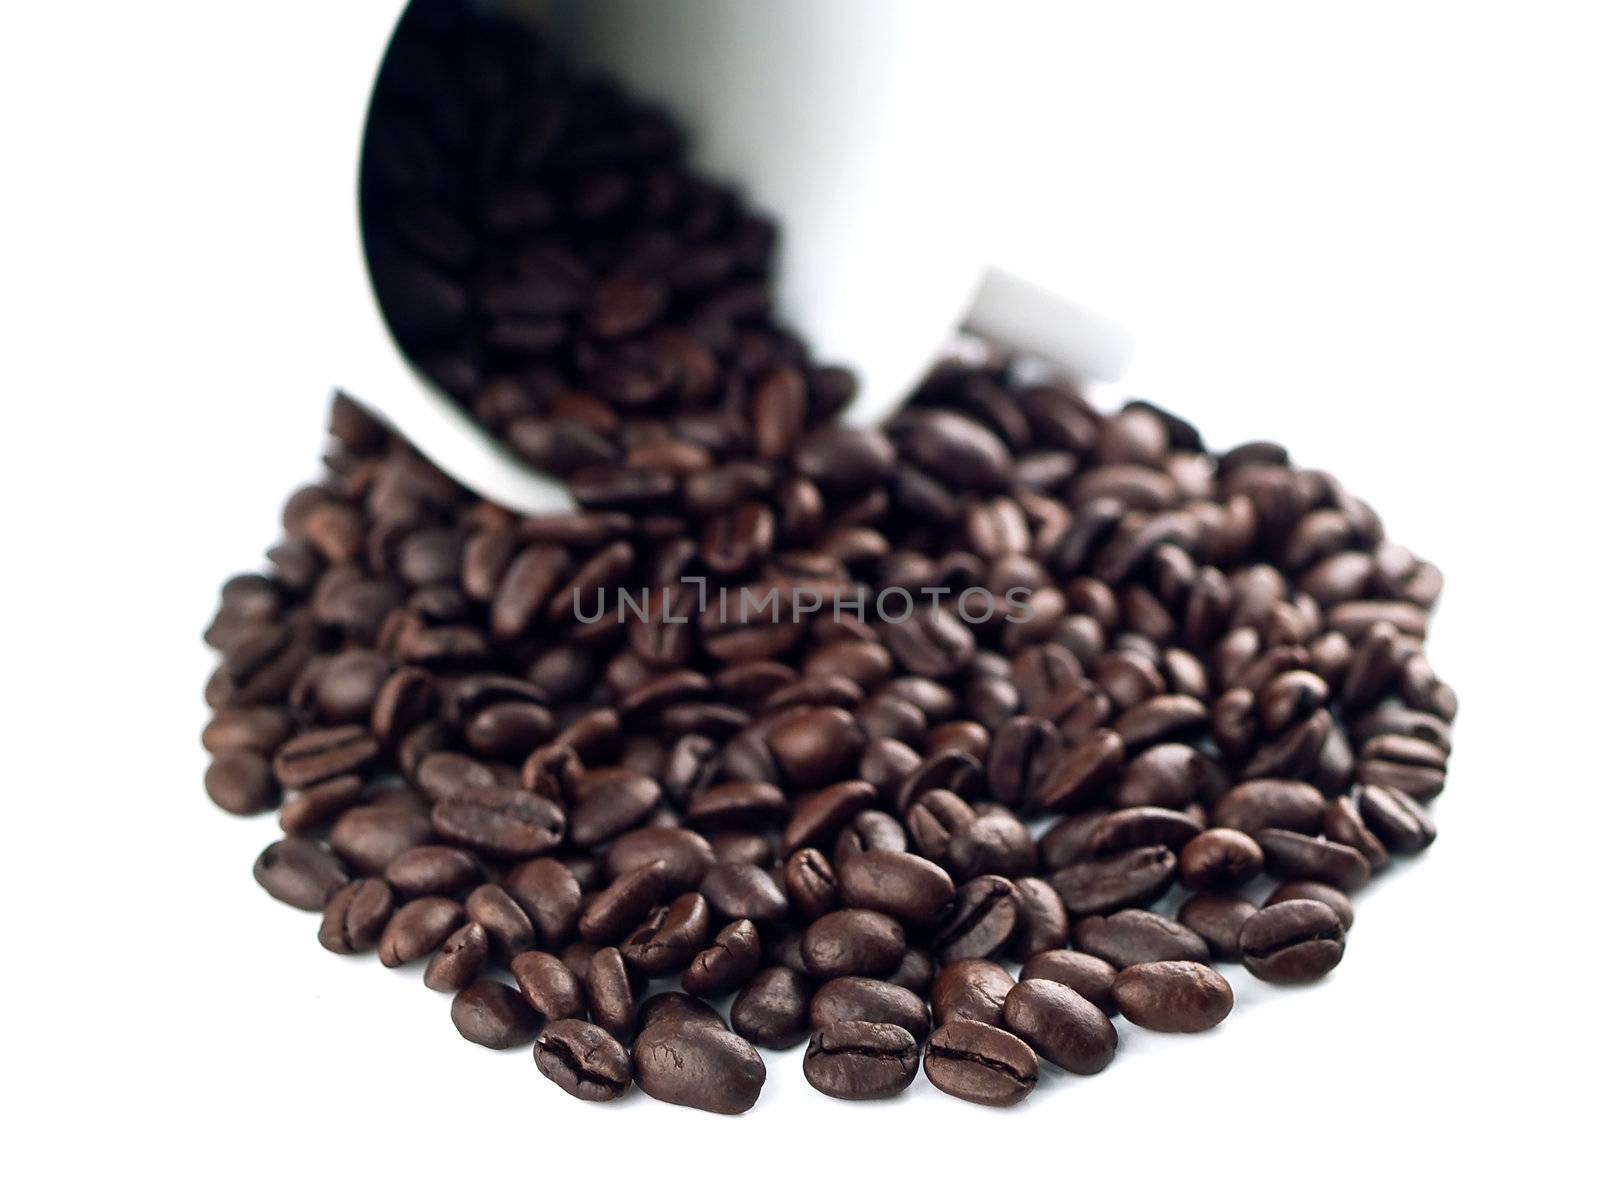 Coffee Beans Spilled from Cup